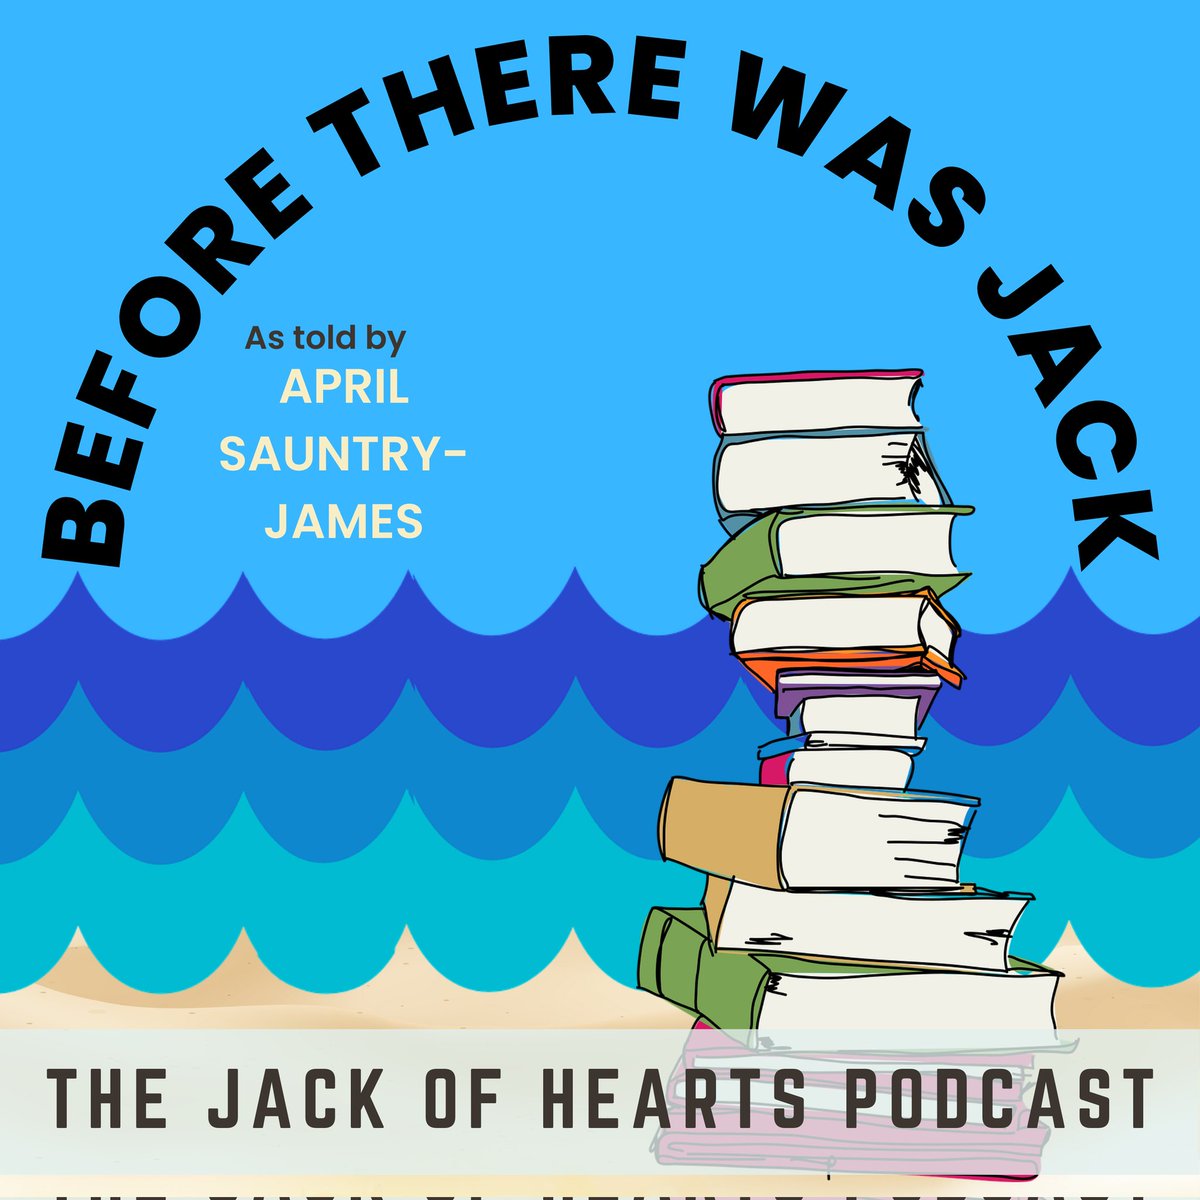 Before There Was Jack' [The Jack of Hearts Podcast S1:E2] Listen here: spotifyanchor-web.app.link/e/qyrM4HjHjIb #podcaster #fictionpodcast #thejackofheartspodcast #beforetherewasjack